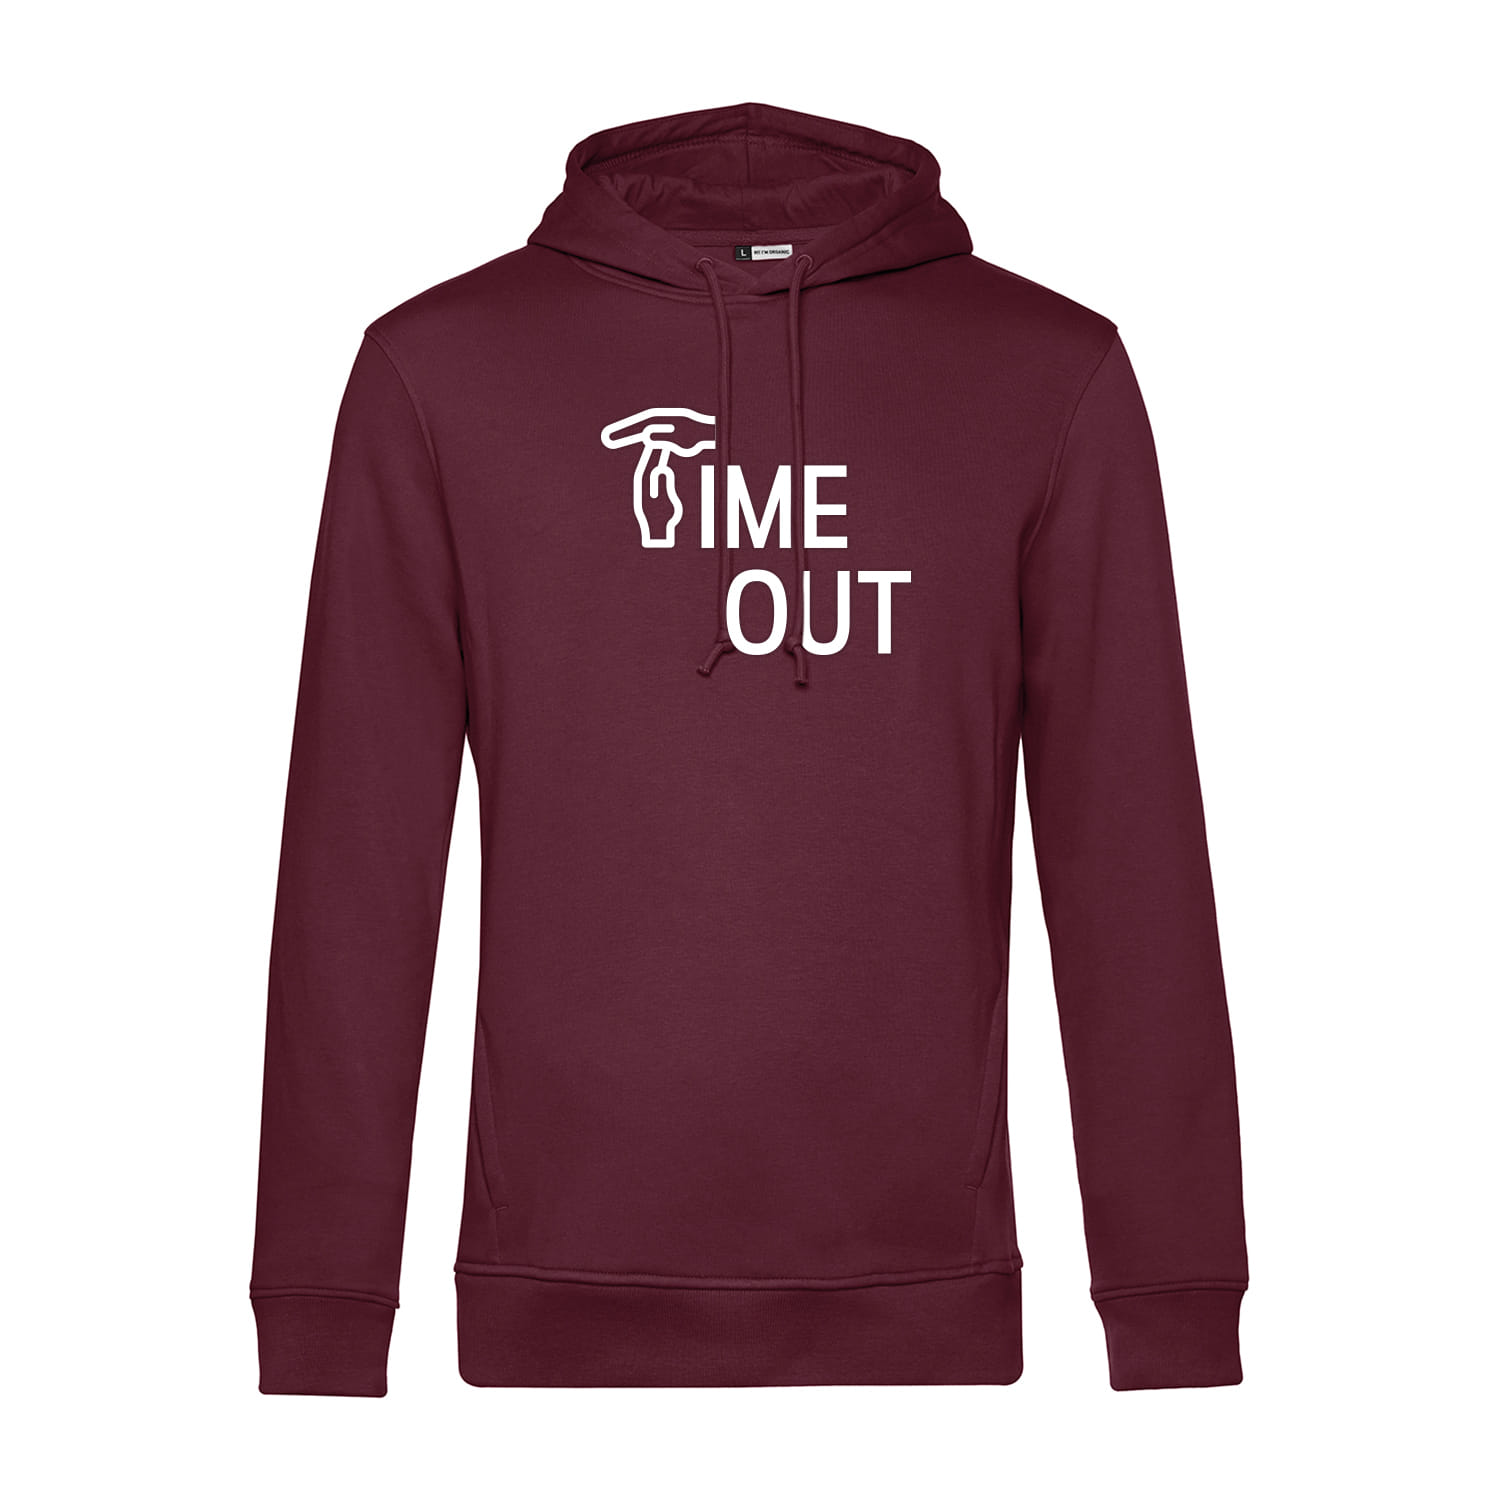 Classic Hoodie "Time Out"